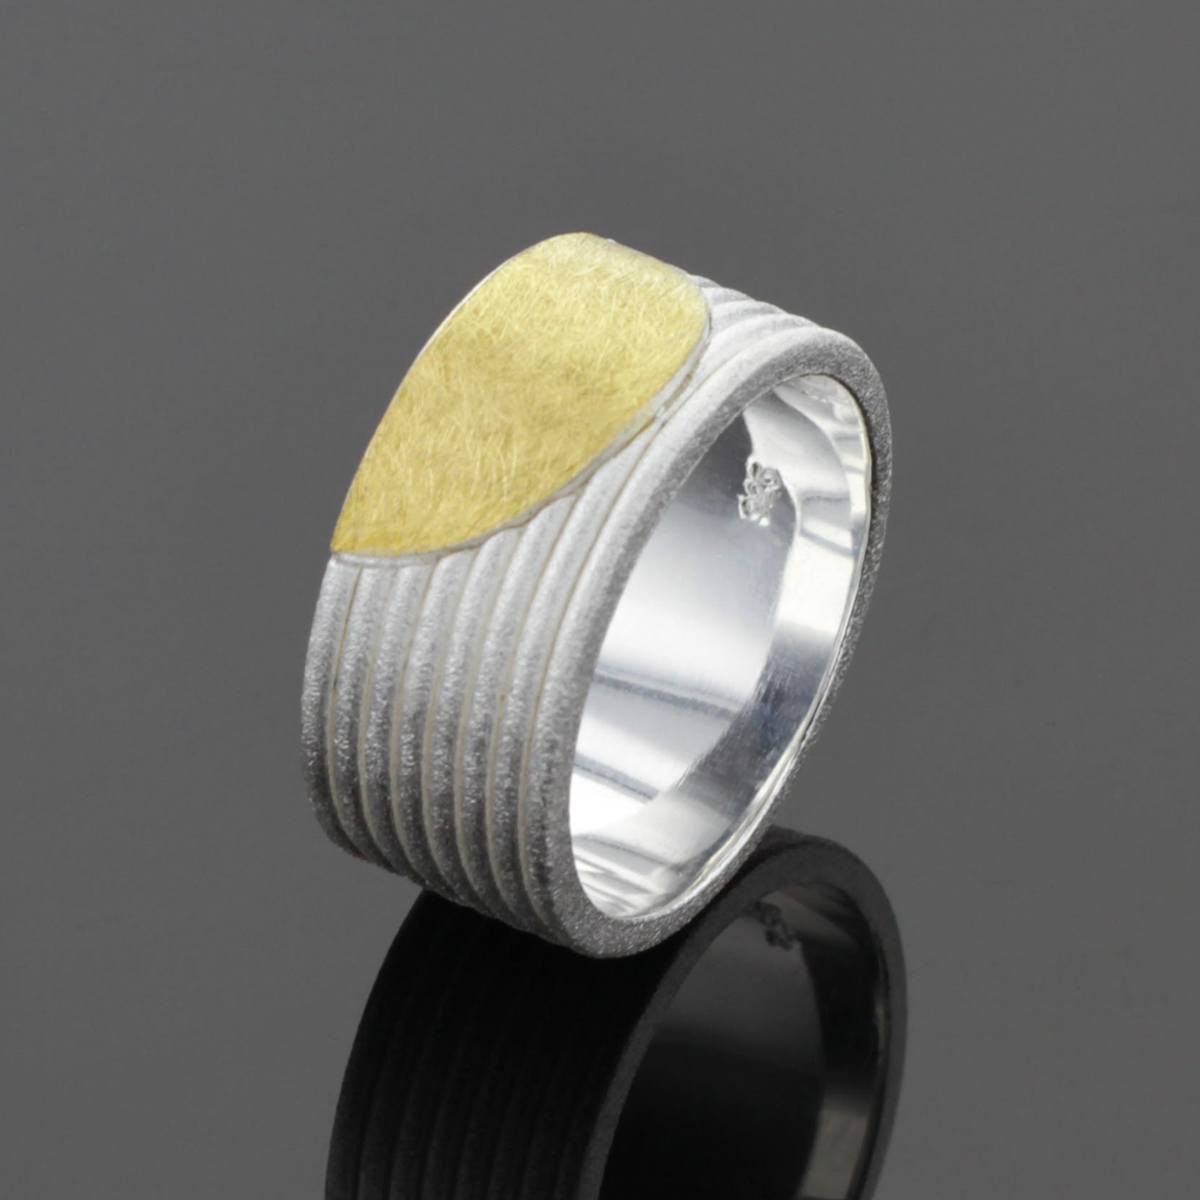 Silver and gold rings made in Mauritius